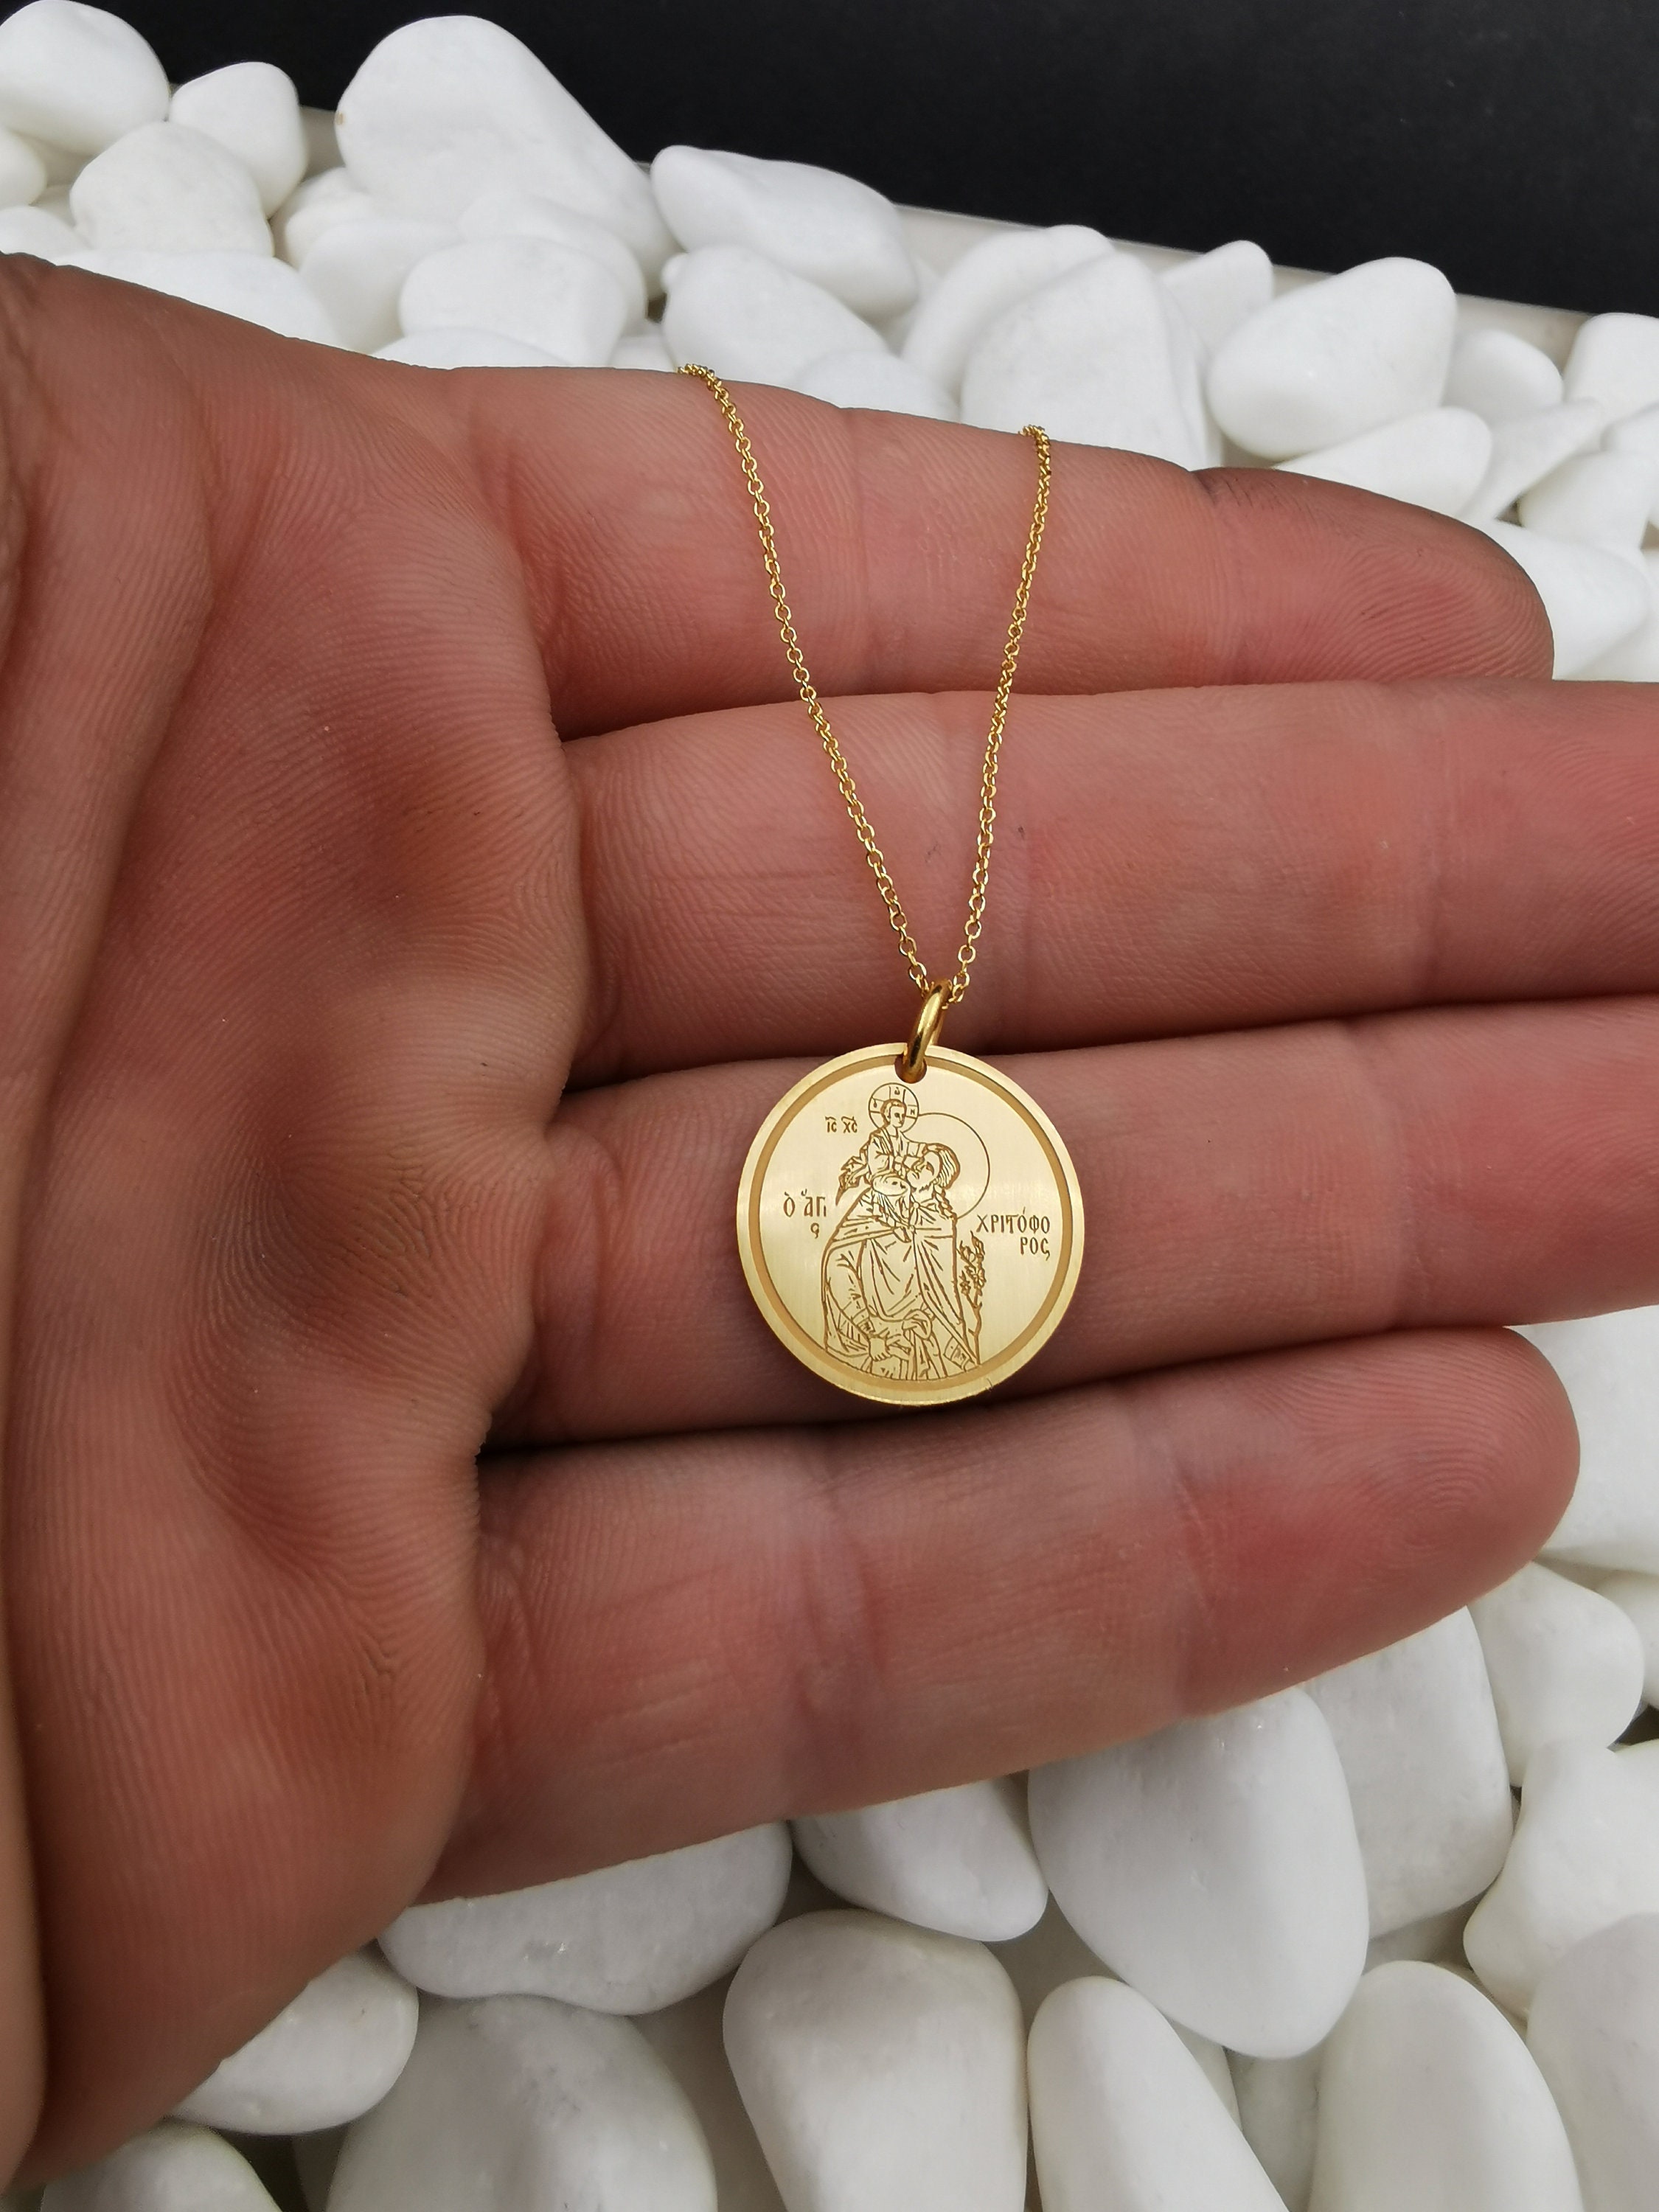 14K Solid Gold Saint Christopher Necklace, Traveler's Protection Religious Greek Jewelry, Personalized Orthodox Pendant